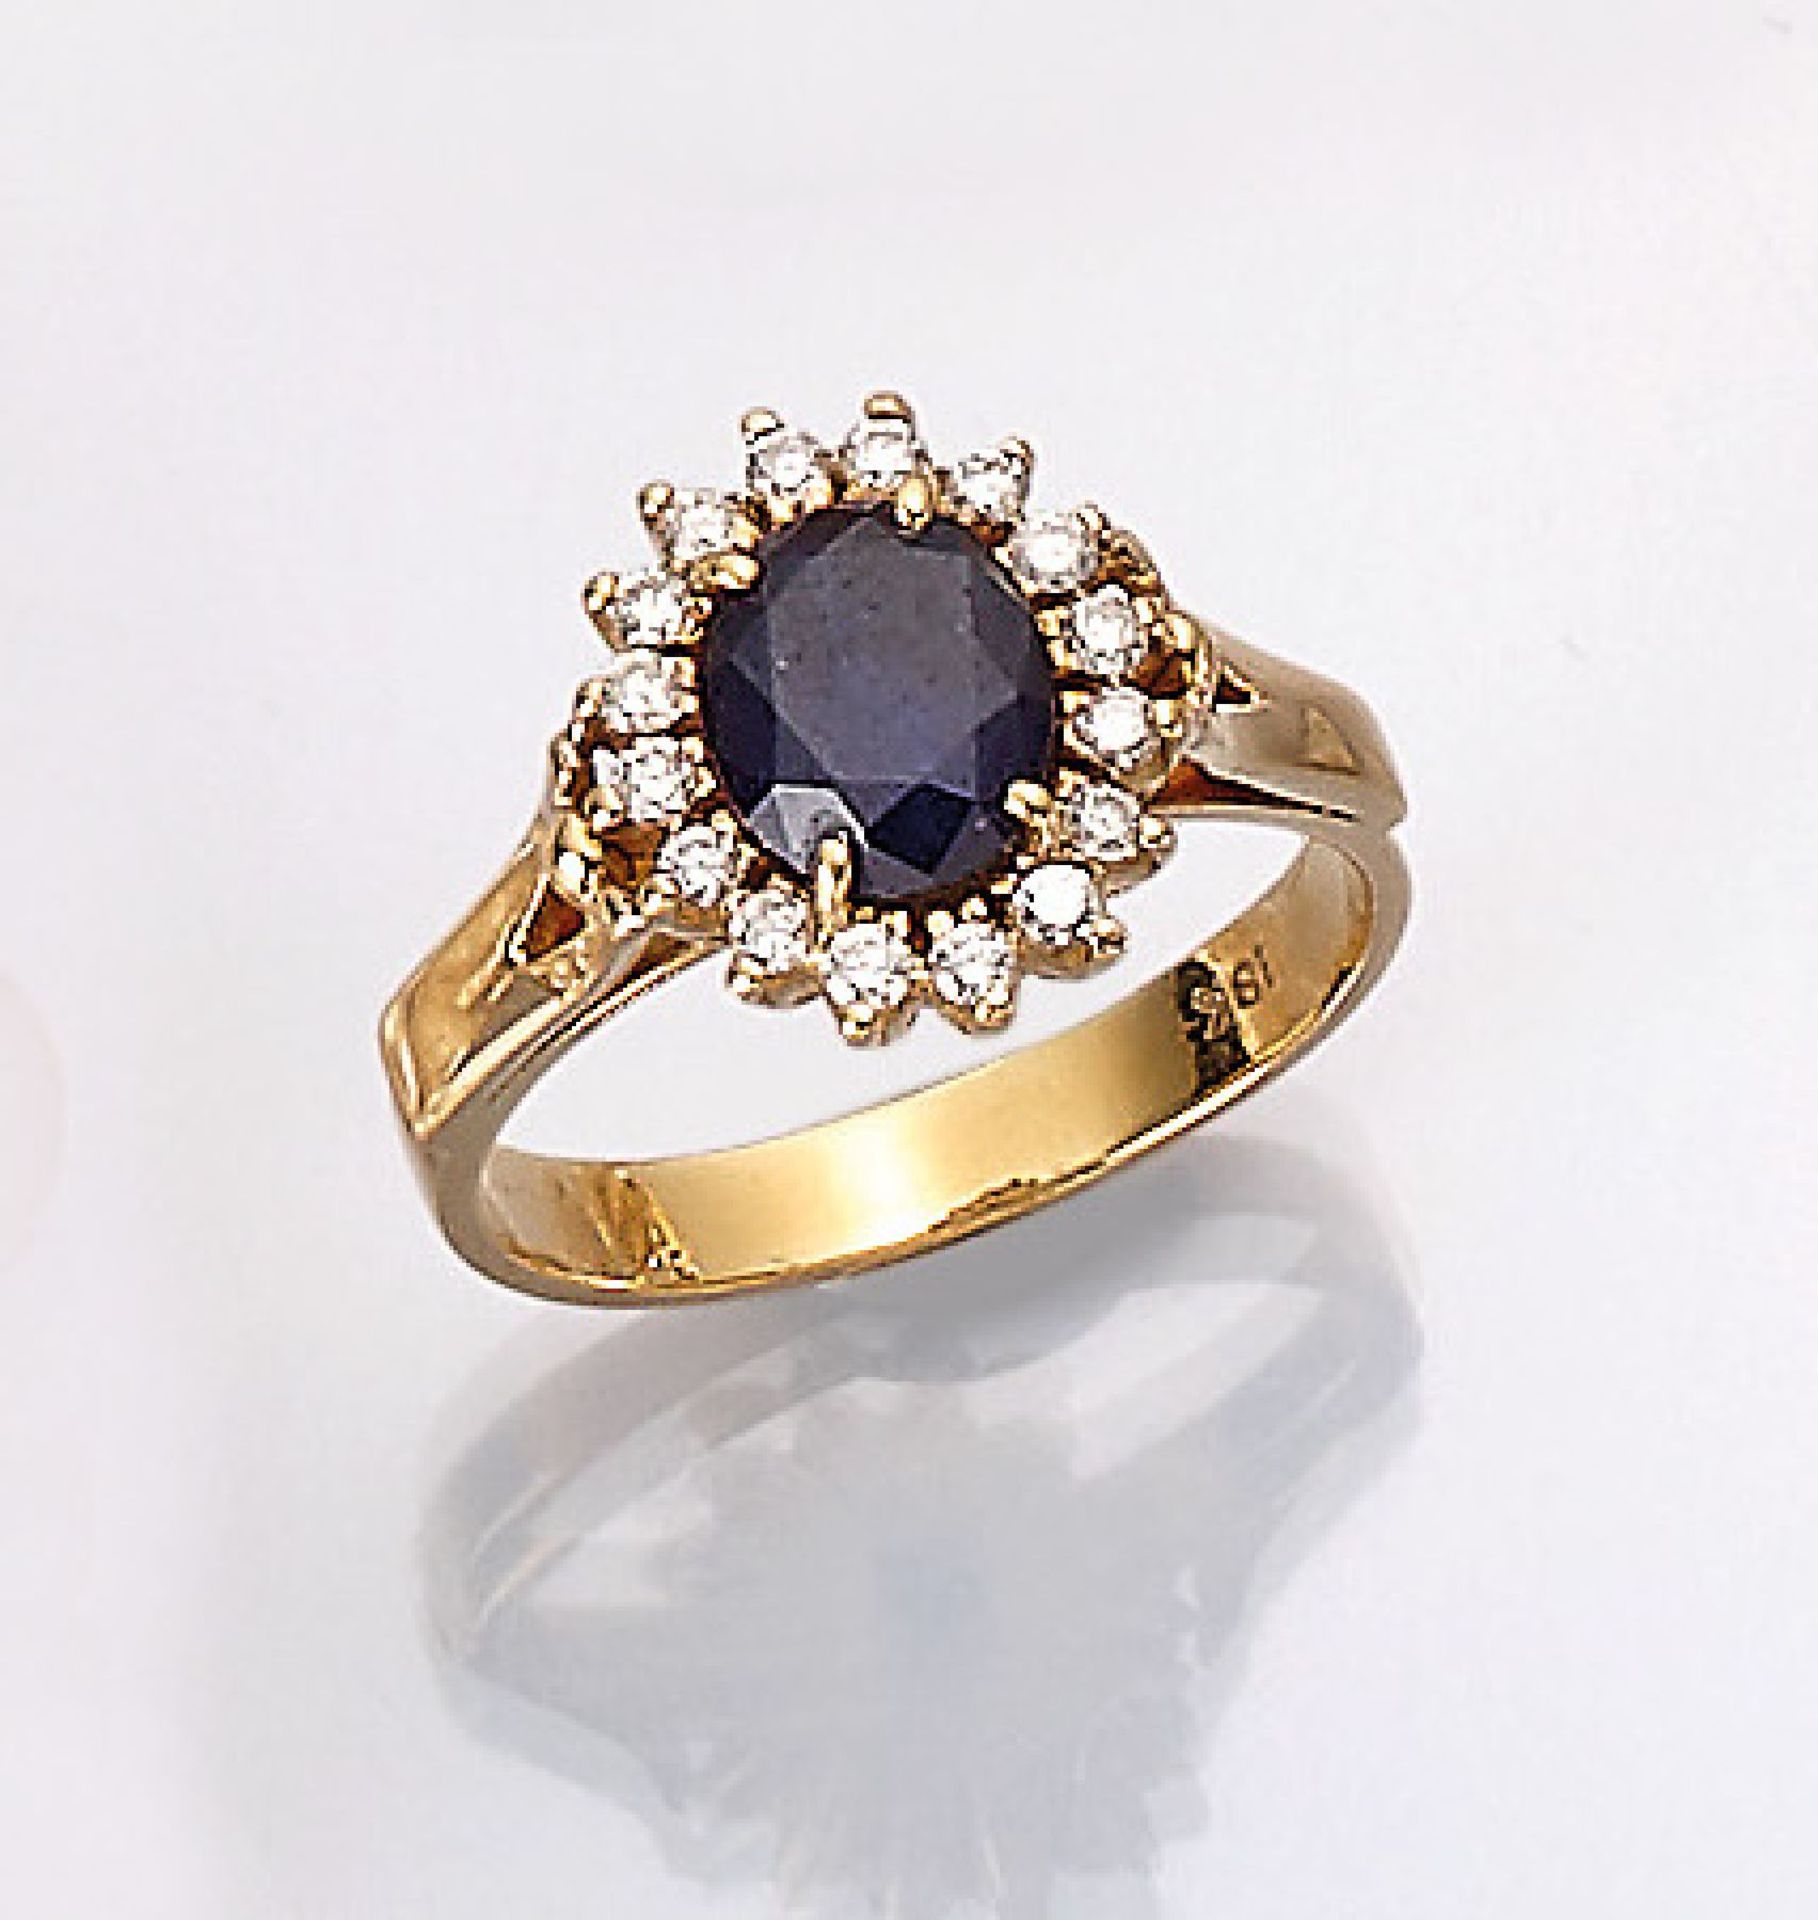 18 kt gold ring with sapphire , YG 750/000, oval bevelled sapphire approx. 1.50 ct, surrounded by